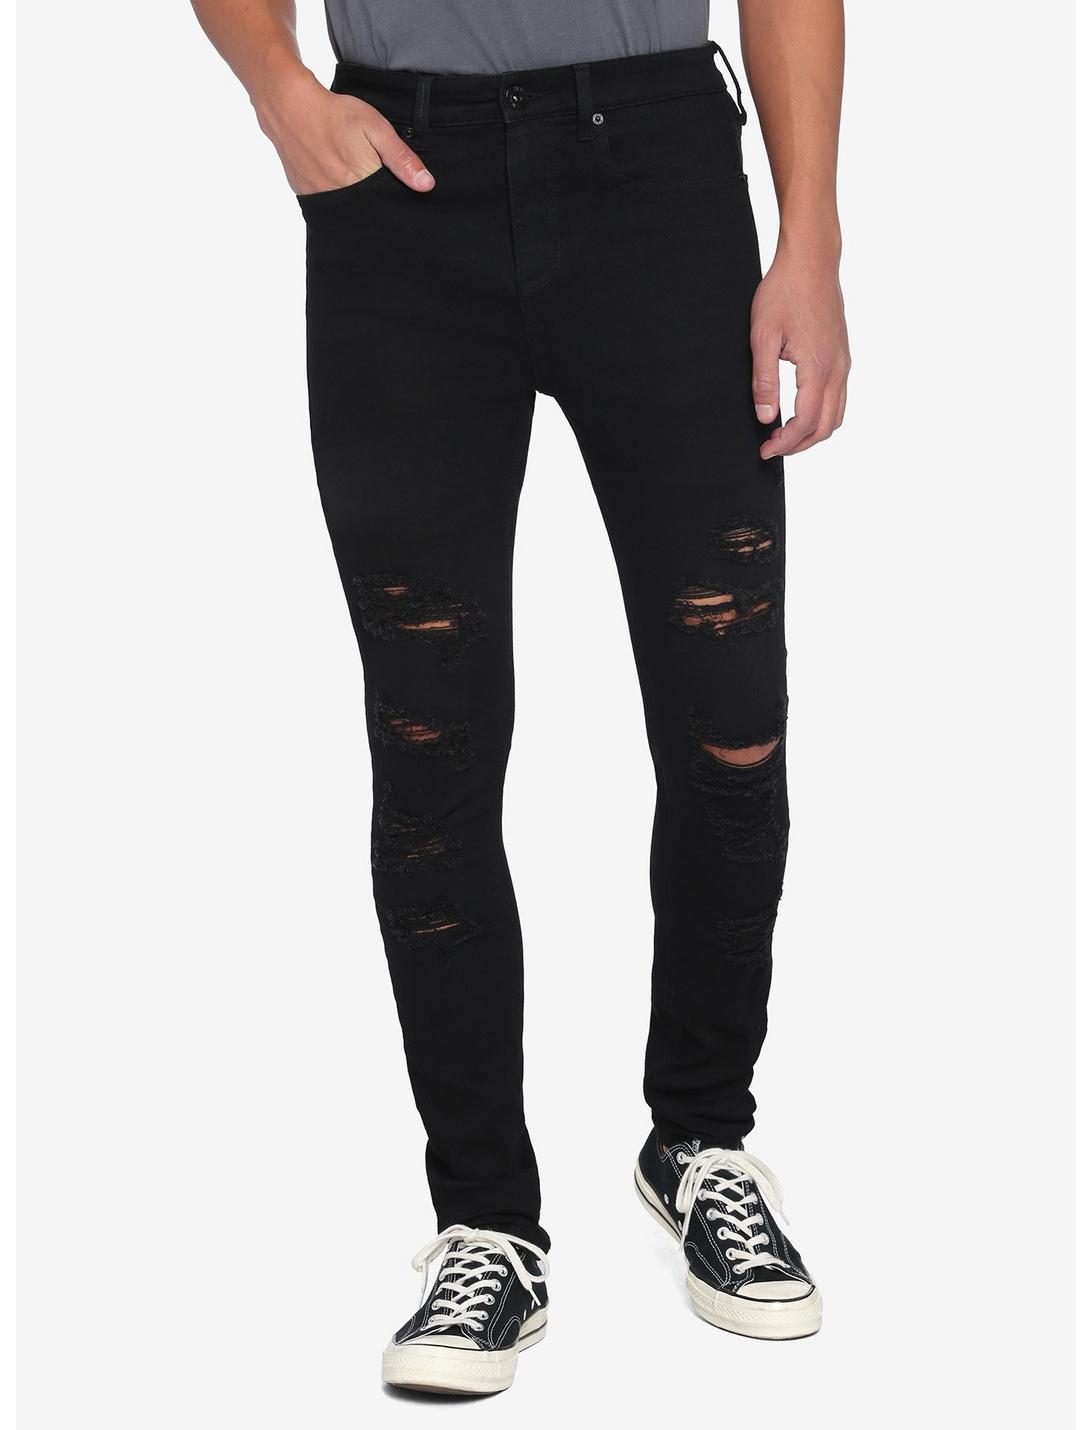 Black Destructed Skinny Jeans | Hot Topic